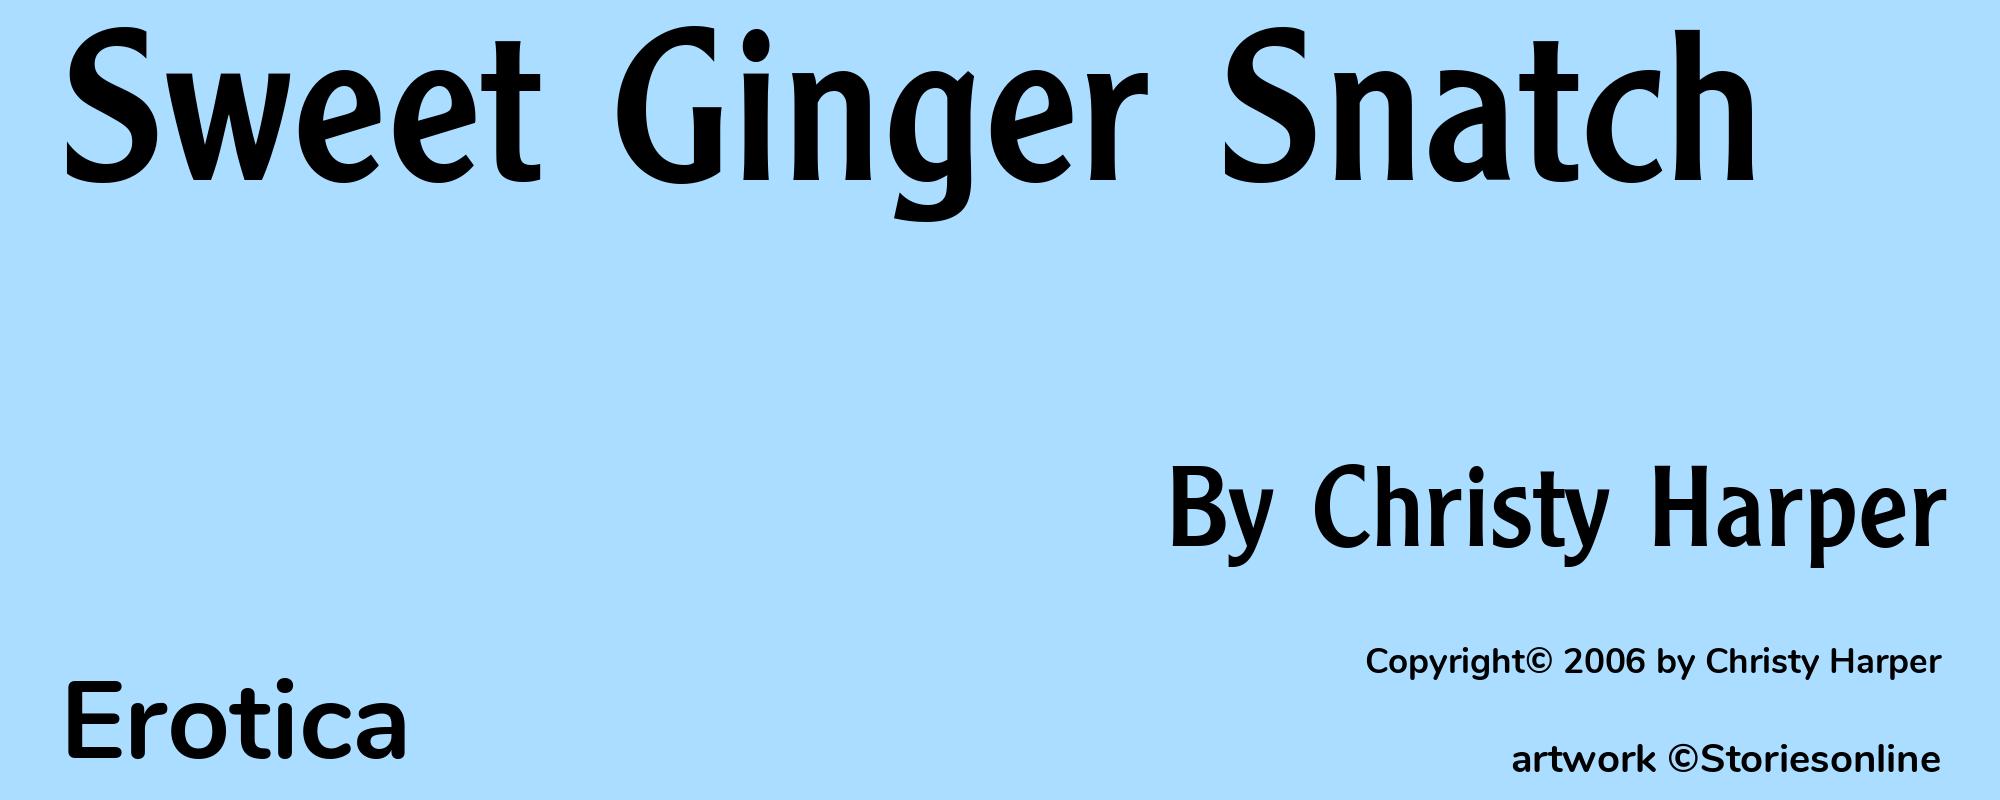 Sweet Ginger Snatch - Cover